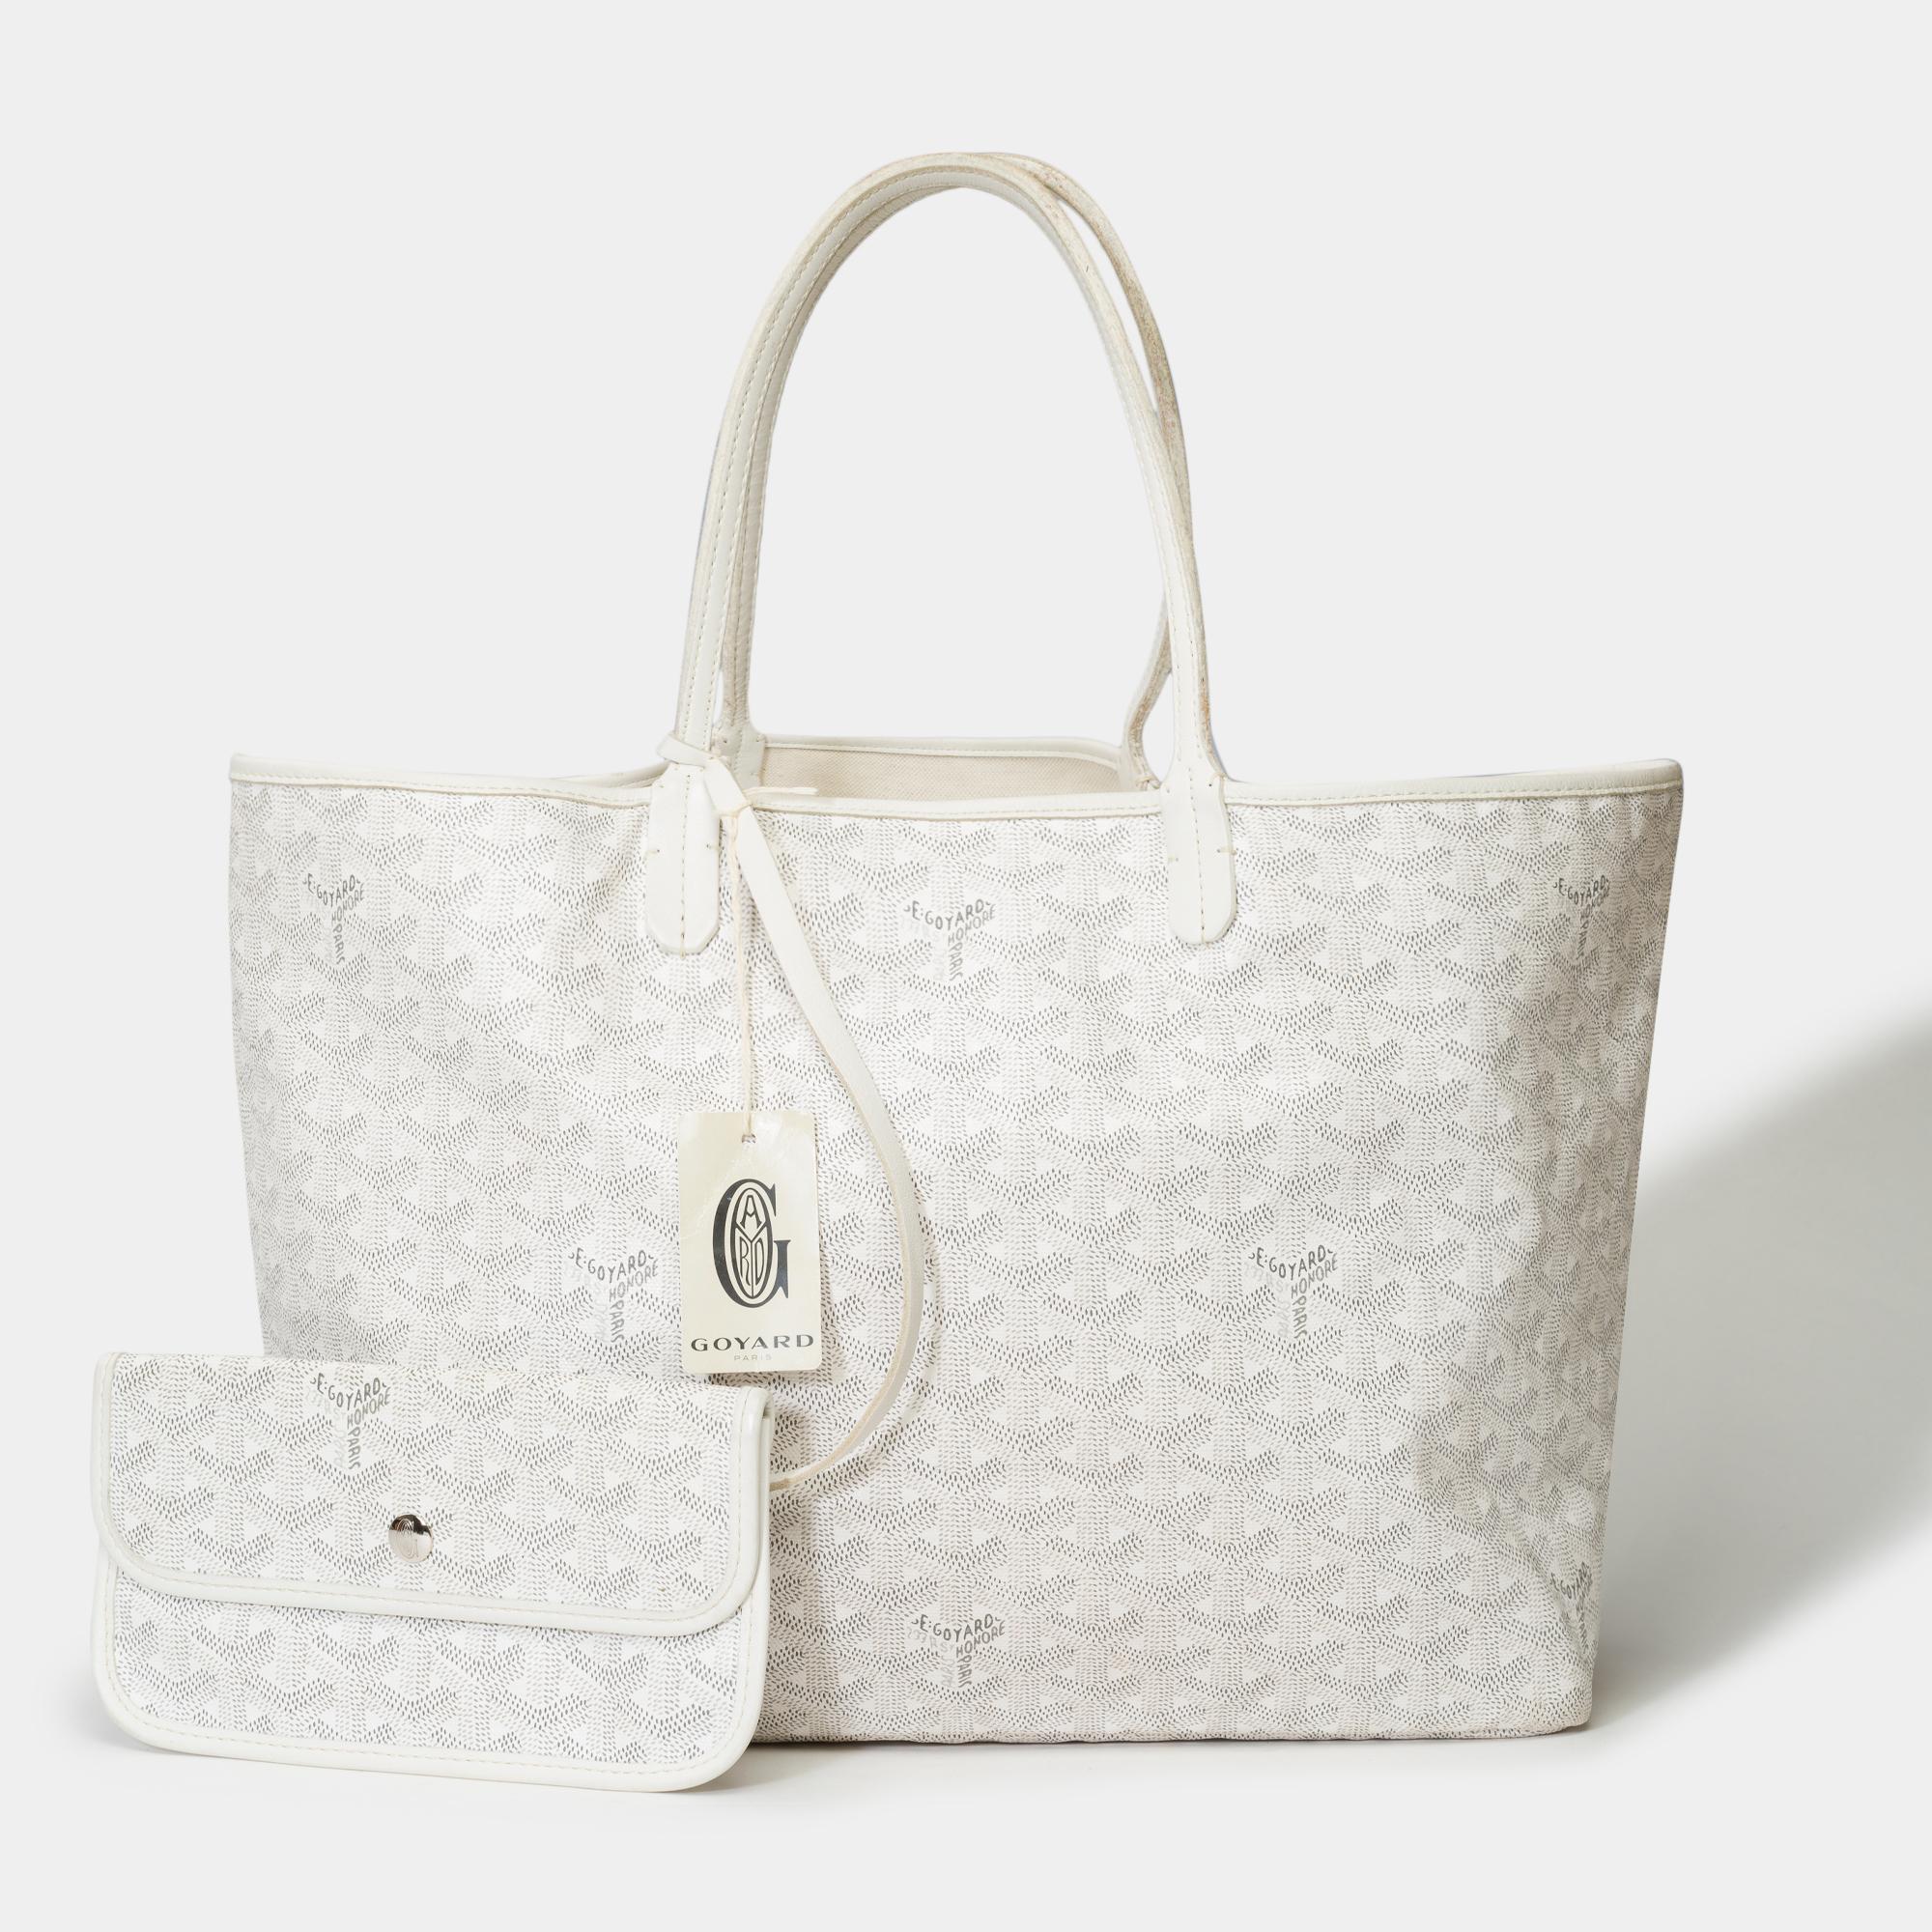 The​ ​Saint​ ​Louis​ ​PM​ ​bag​ ​is​ ​made​ ​of​ ​white​ ​and​ ​grey​ ​Goyardine​ ​canvas​ ​and​ ​is​ ​unlined,​ ​it​ ​is​ ​extremely​ ​light​ ​and​ ​completely​ ​reversible,​ ​allowing​ ​it​ ​to​ ​be​ ​worn​ ​on​ ​the​ ​spot,​ ​on​ ​the​